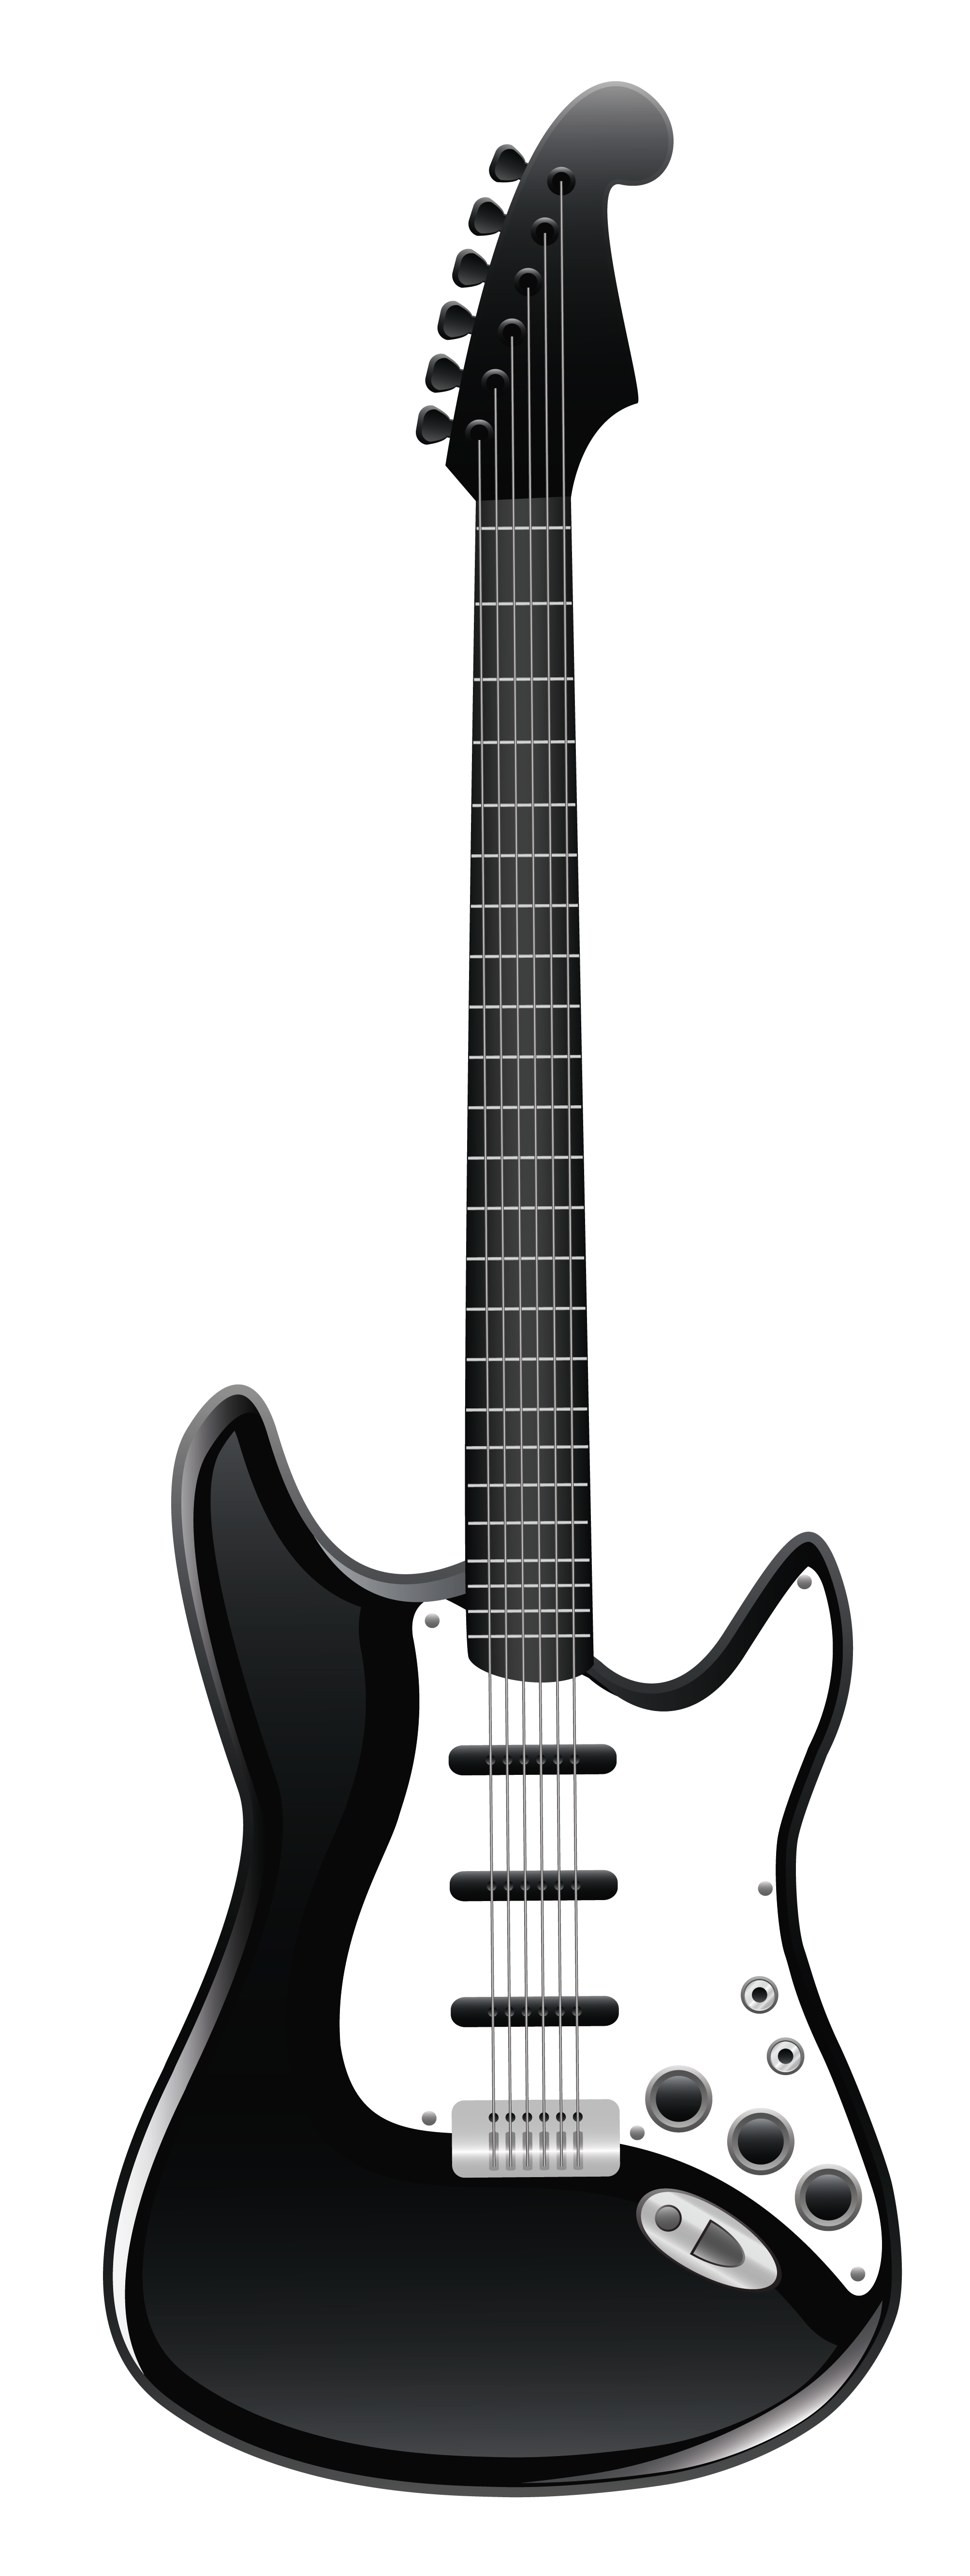 Black And White Guitar Clipart Best